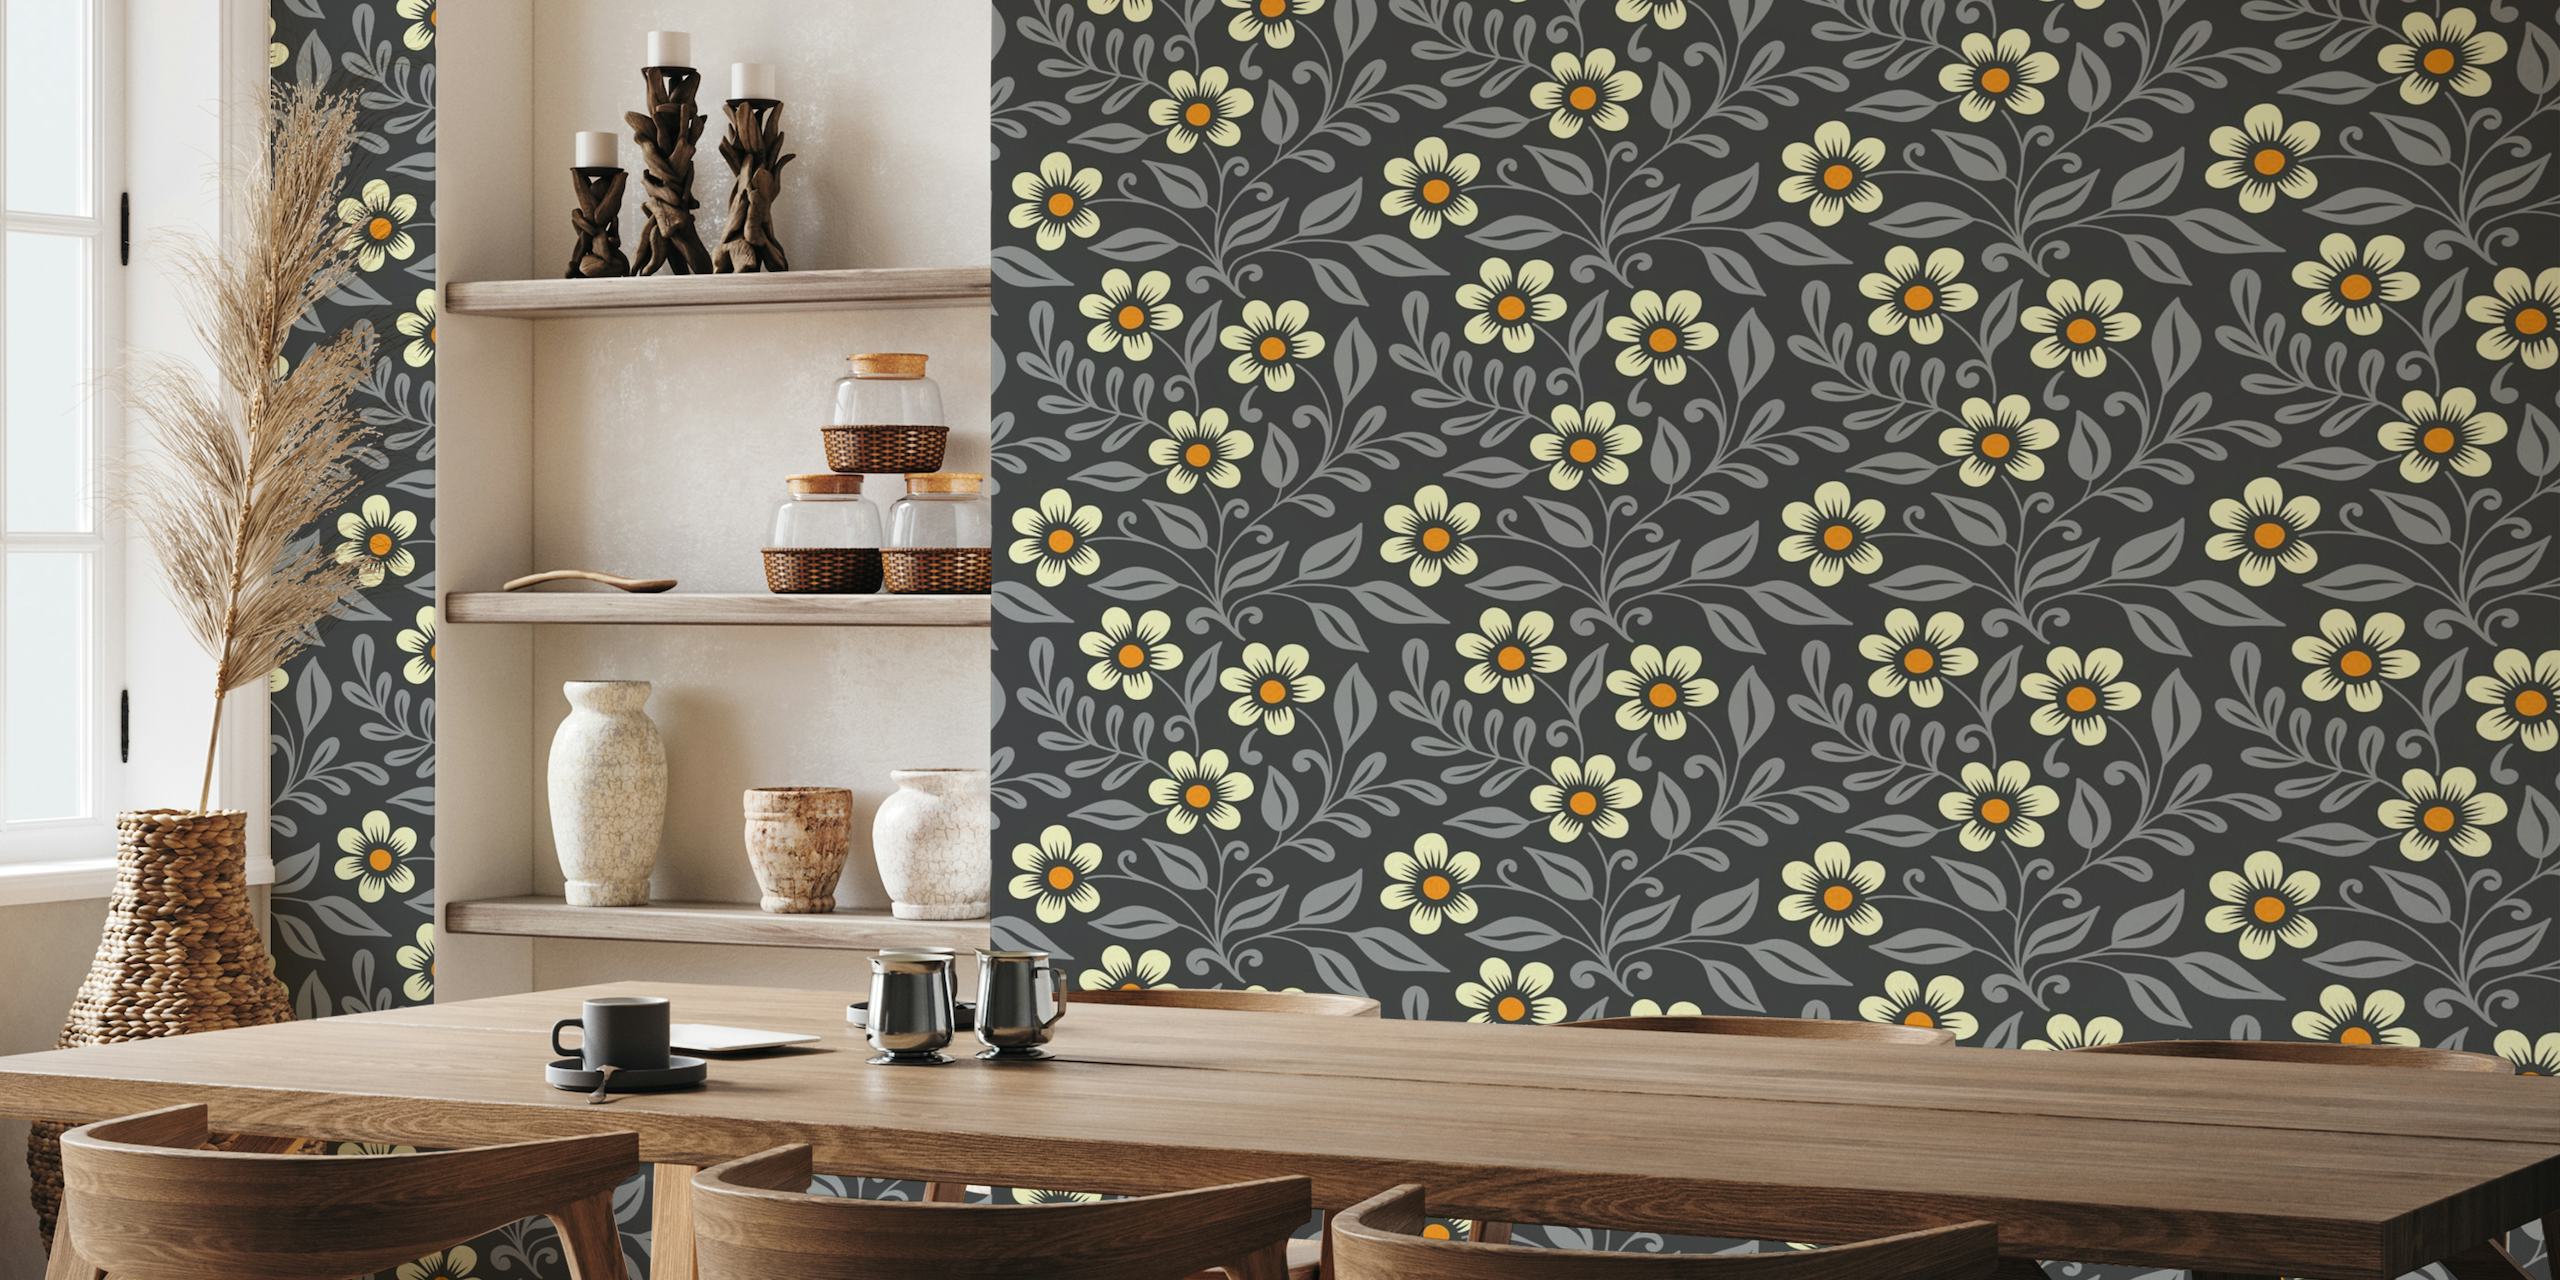 Hand-drawn wildflowers on grey background wall mural